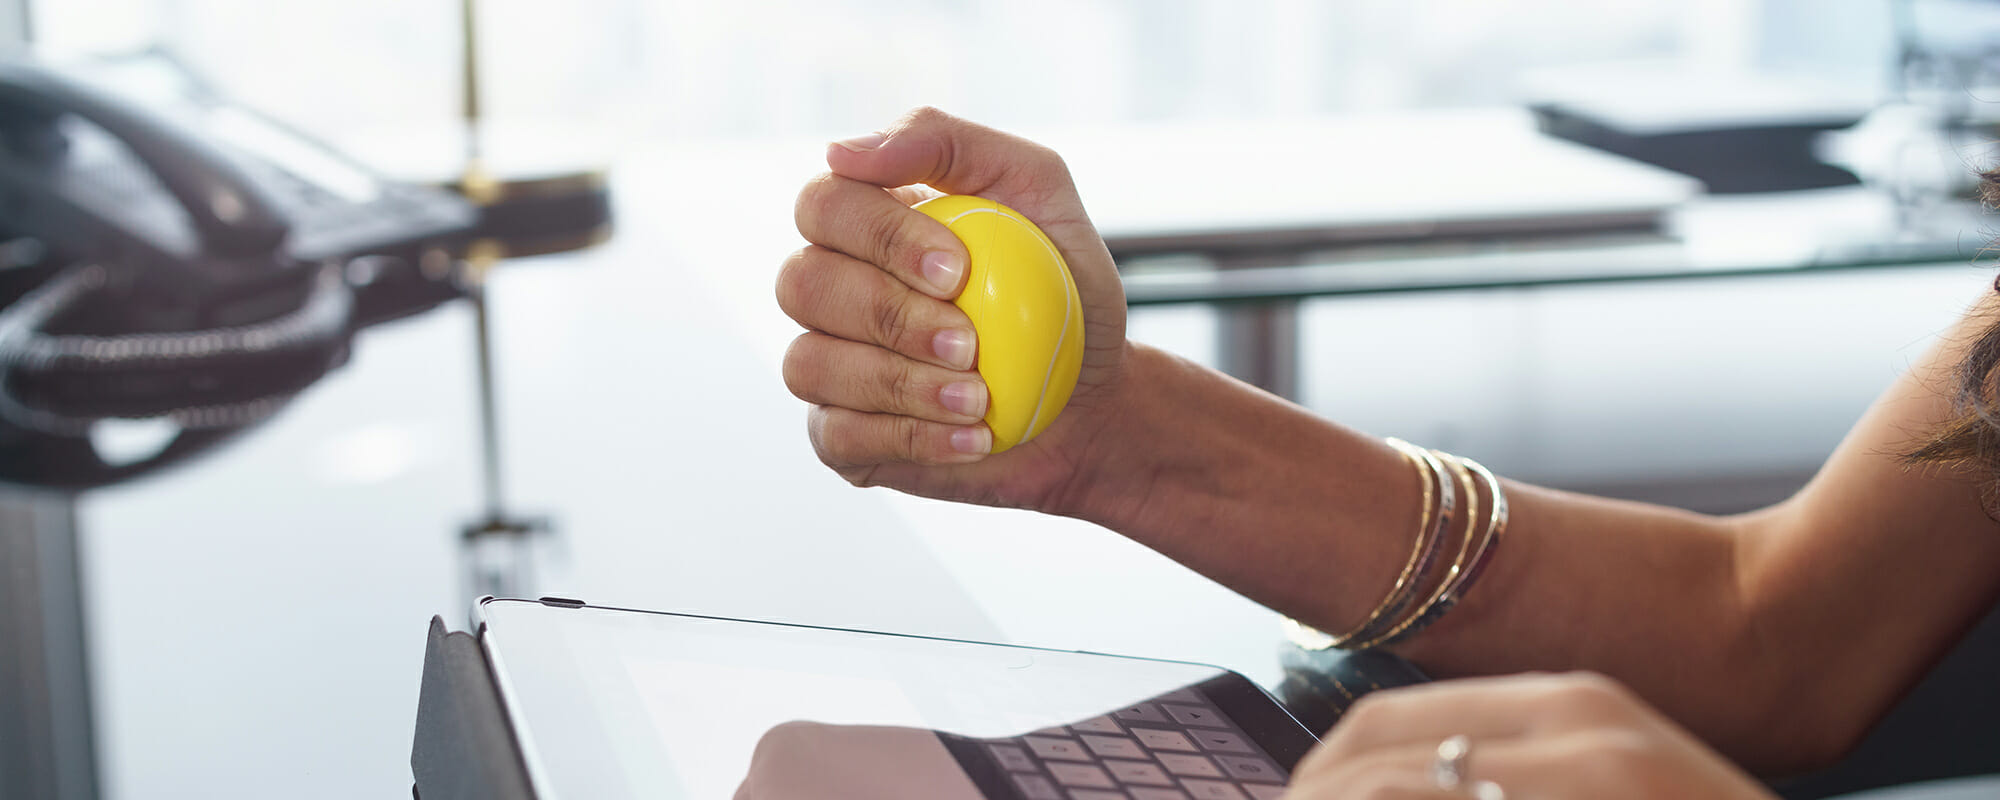 Stressed office worker with anti stress ball types email